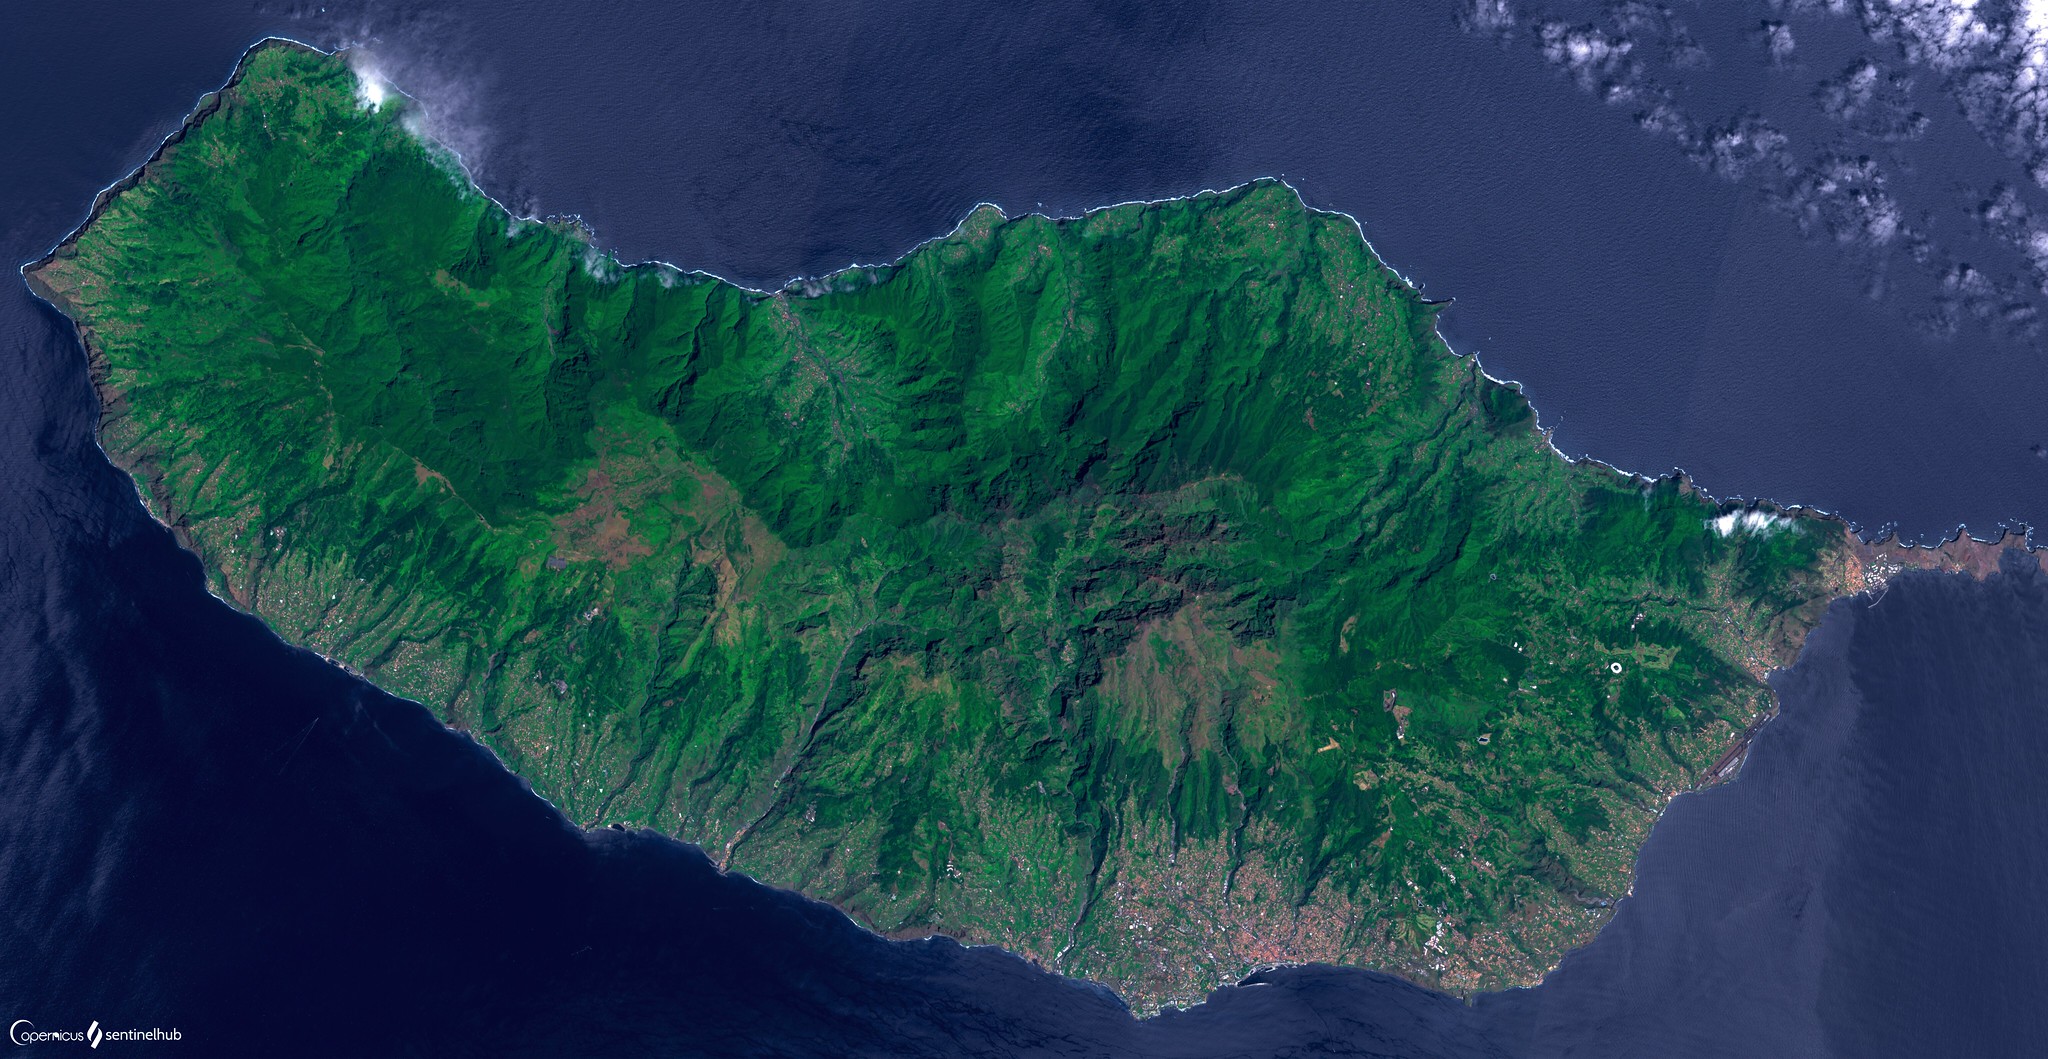 Satellite image fo the Island of Madeira, west of Africa. The image shows a mountainous, green island surrounded by dark blue water.